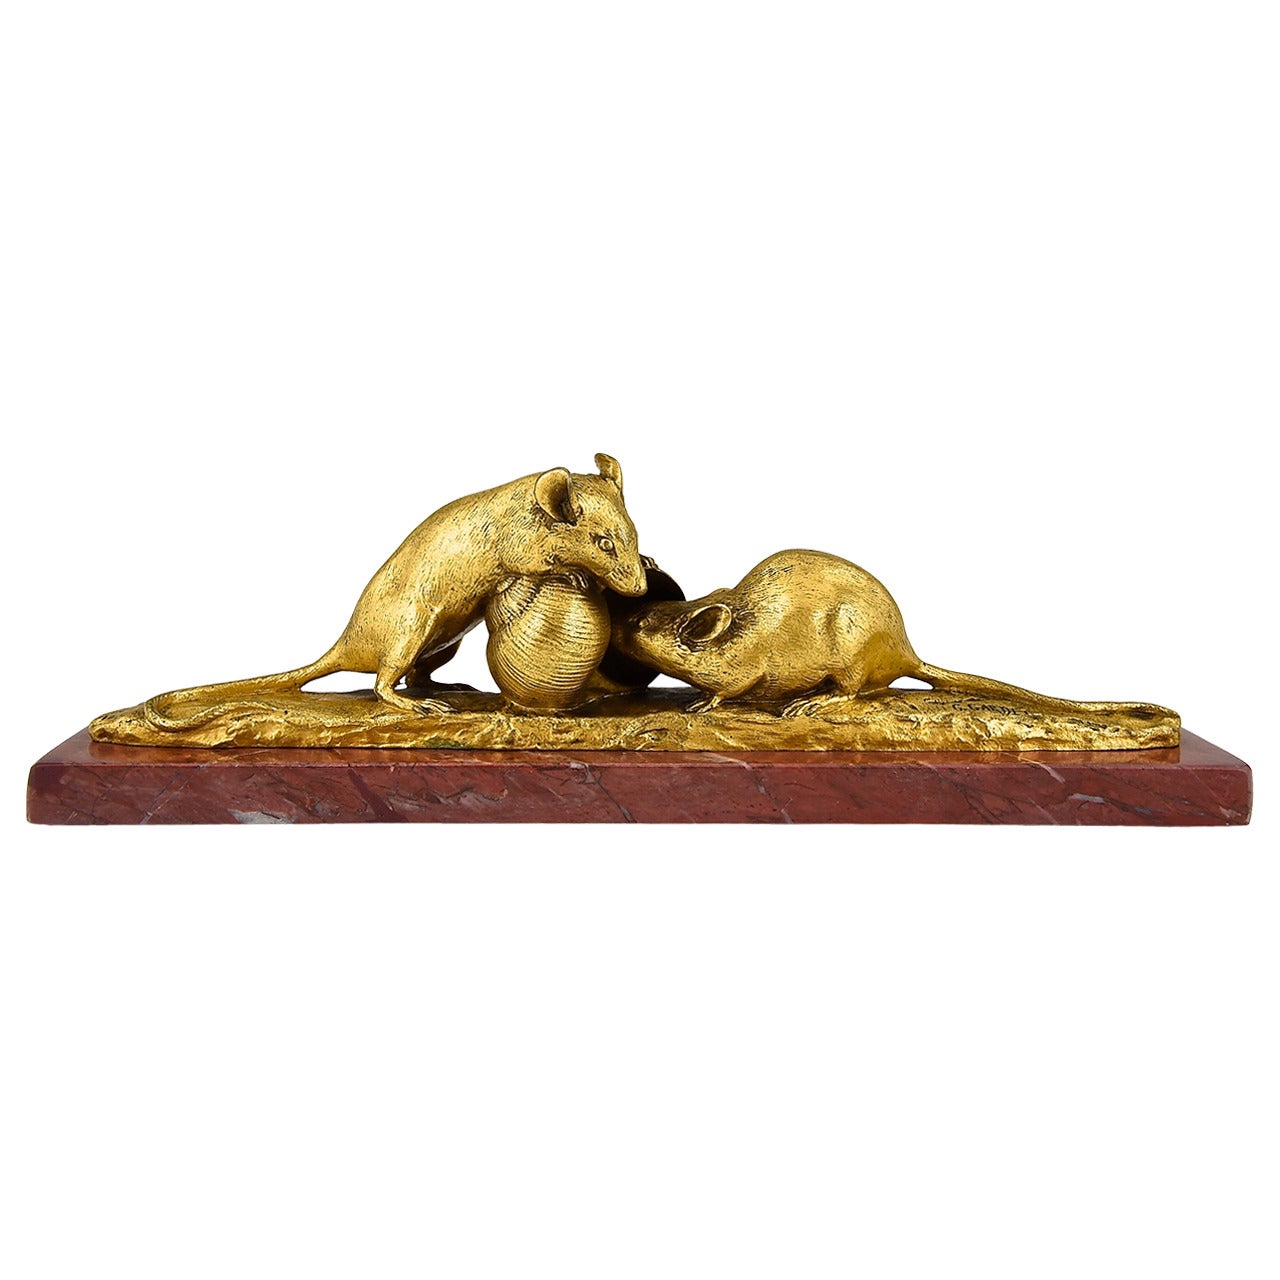 Antique Gilt Bronze Sculpture of Mice by G. Gardet, Barbedienne Foundry